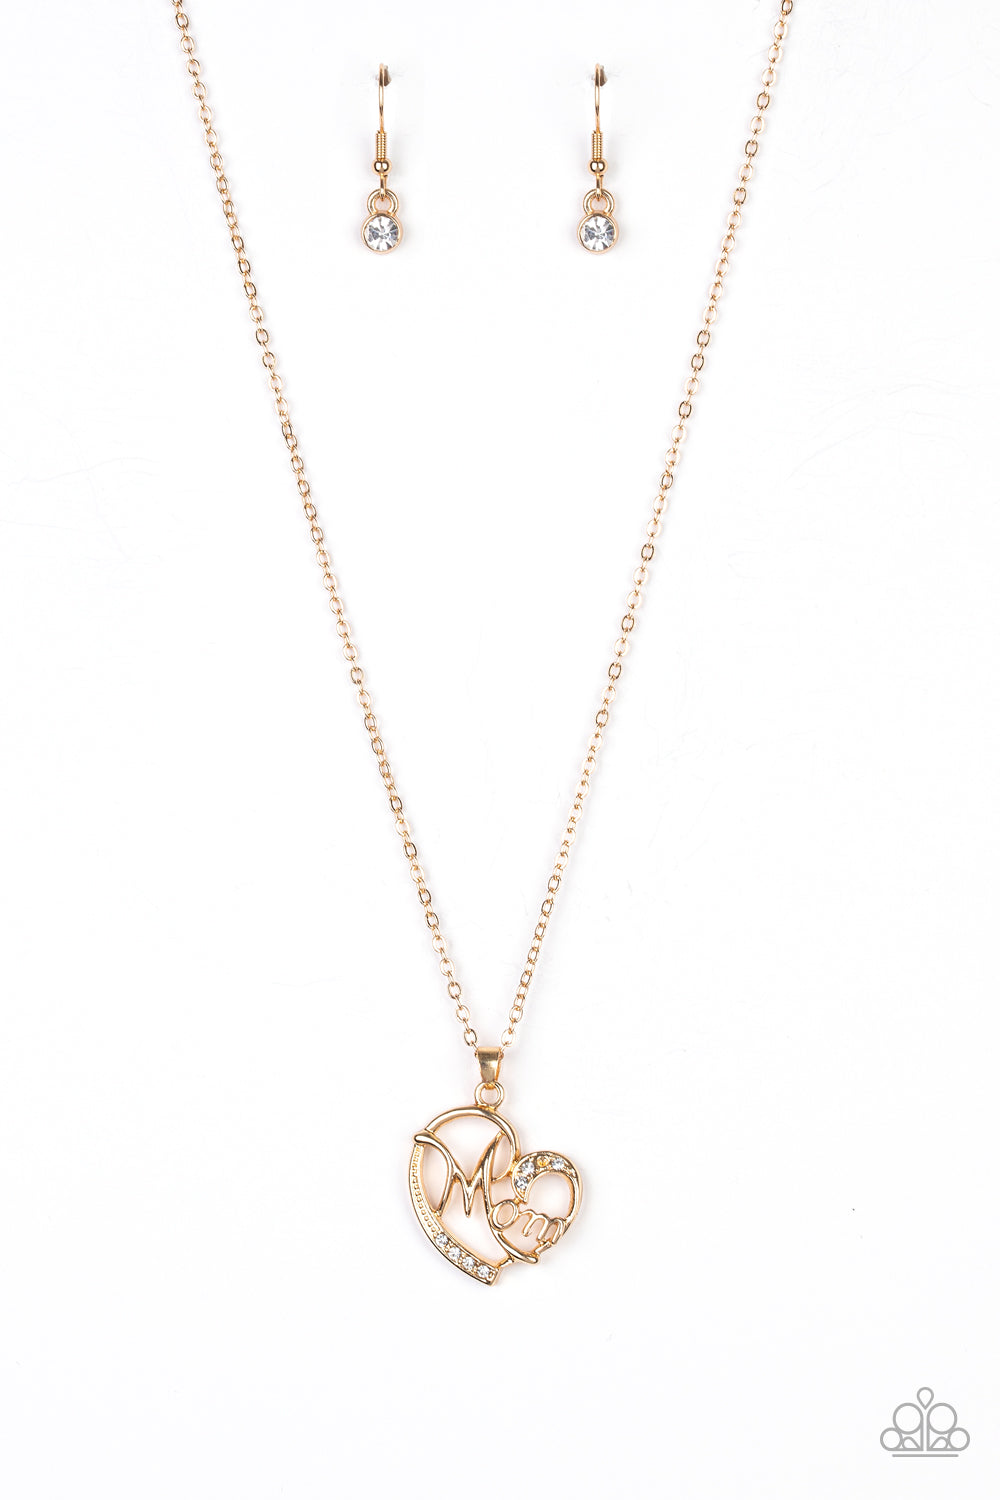 Mom Moments Gold Necklace